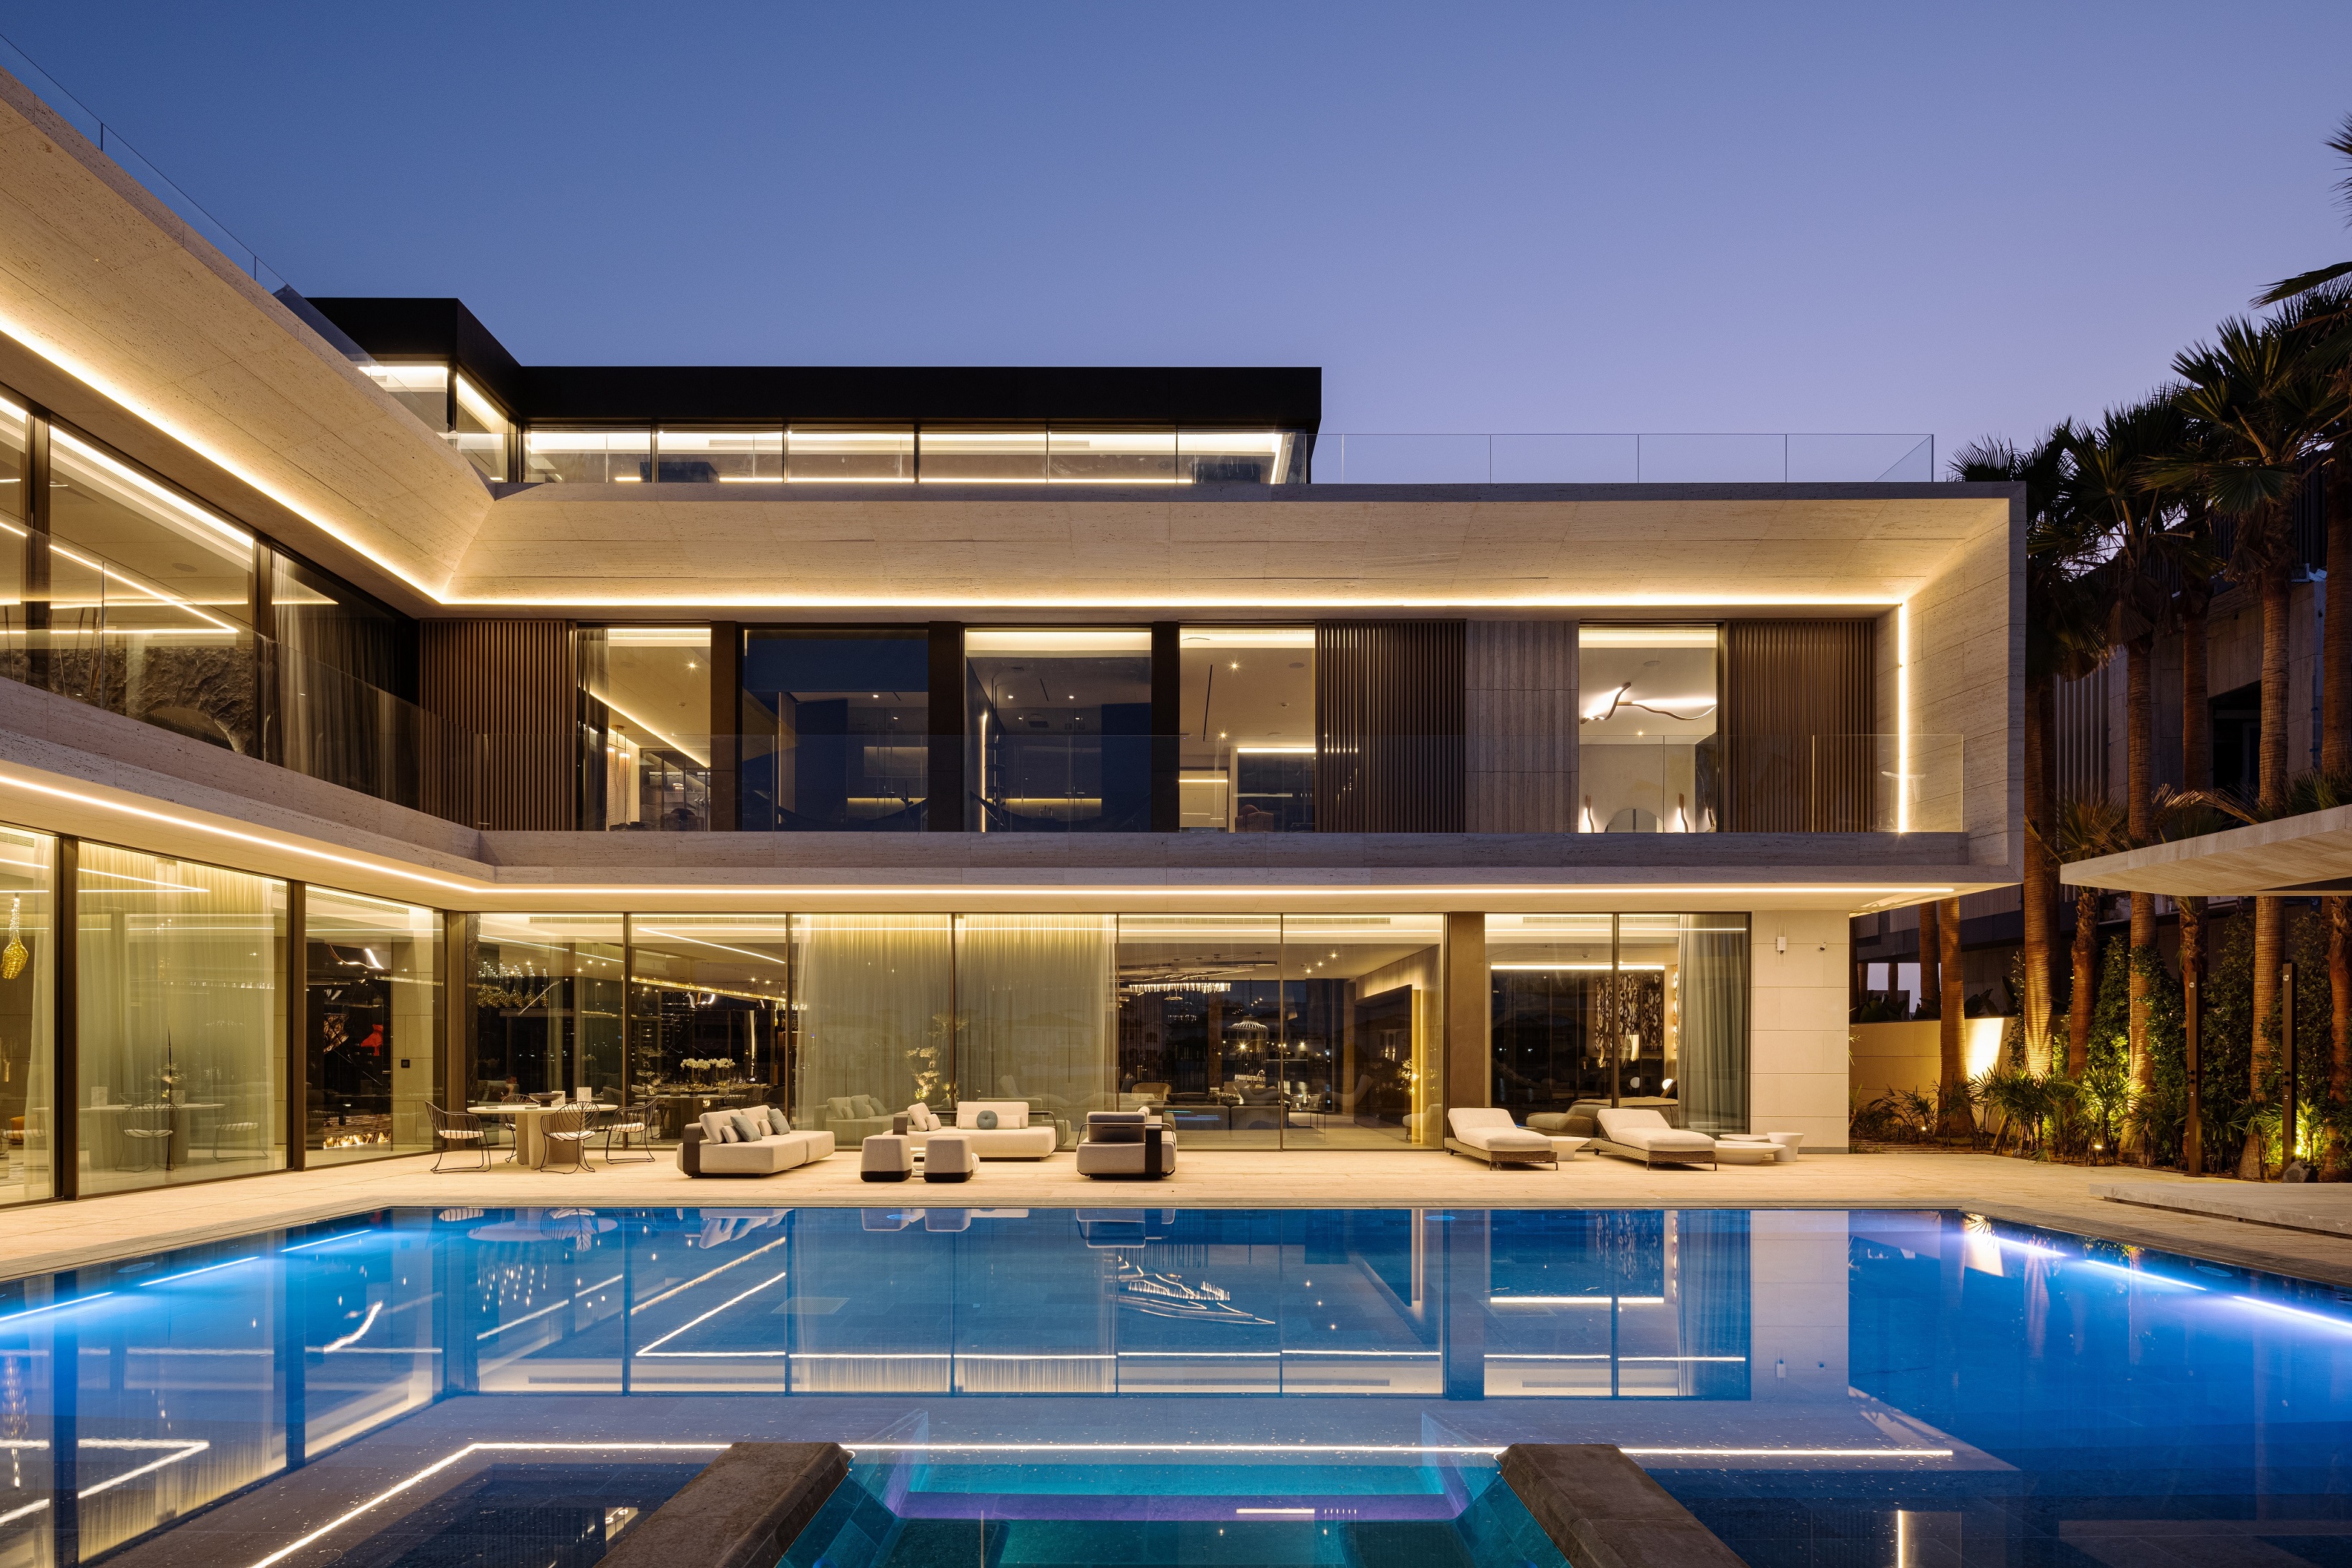 CK hands over two ultra-luxury signature villas on ‘Billionaires’ Row’ in Palm Jumeirah